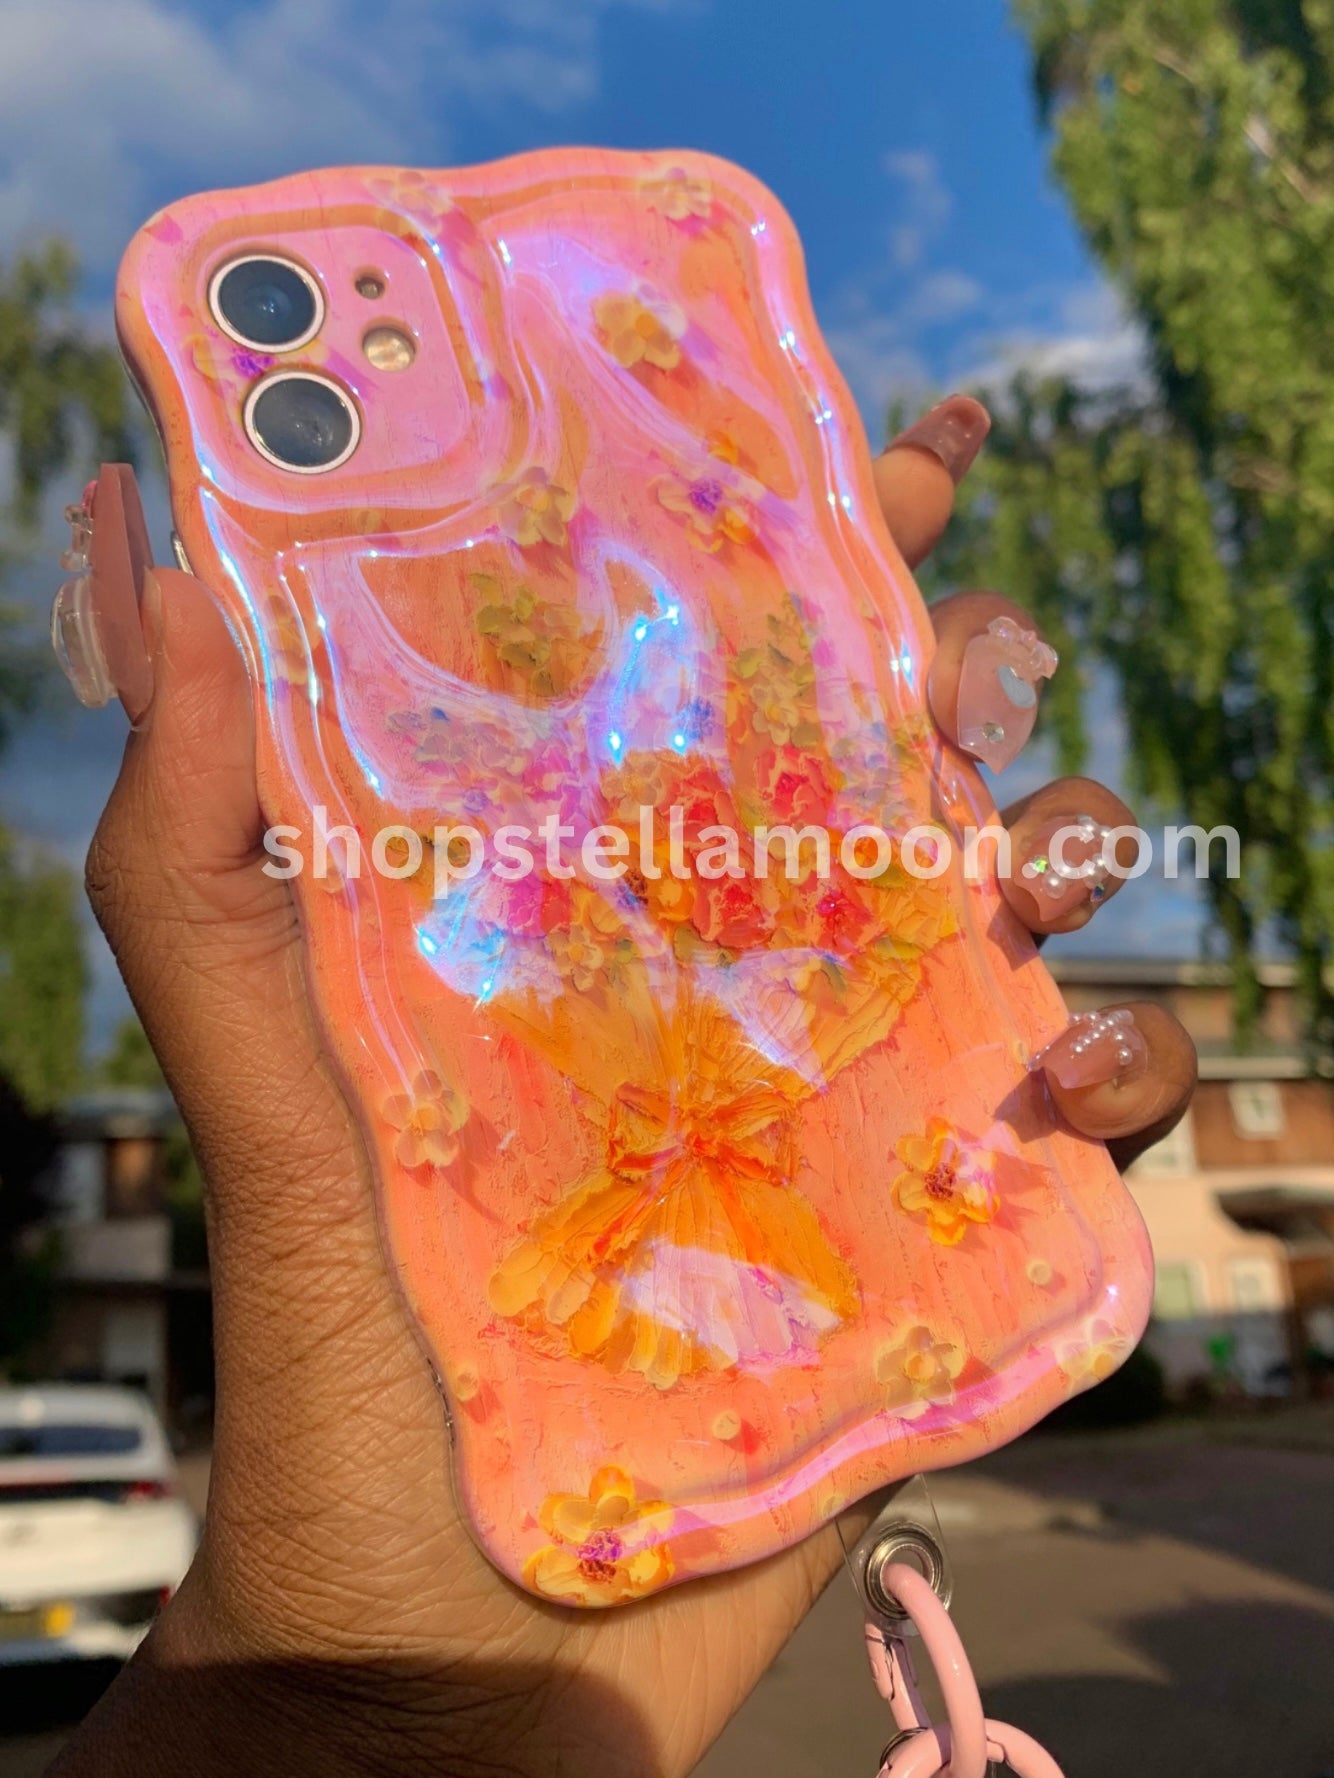 PINK DELIGHT IPHONE CASE ($27)